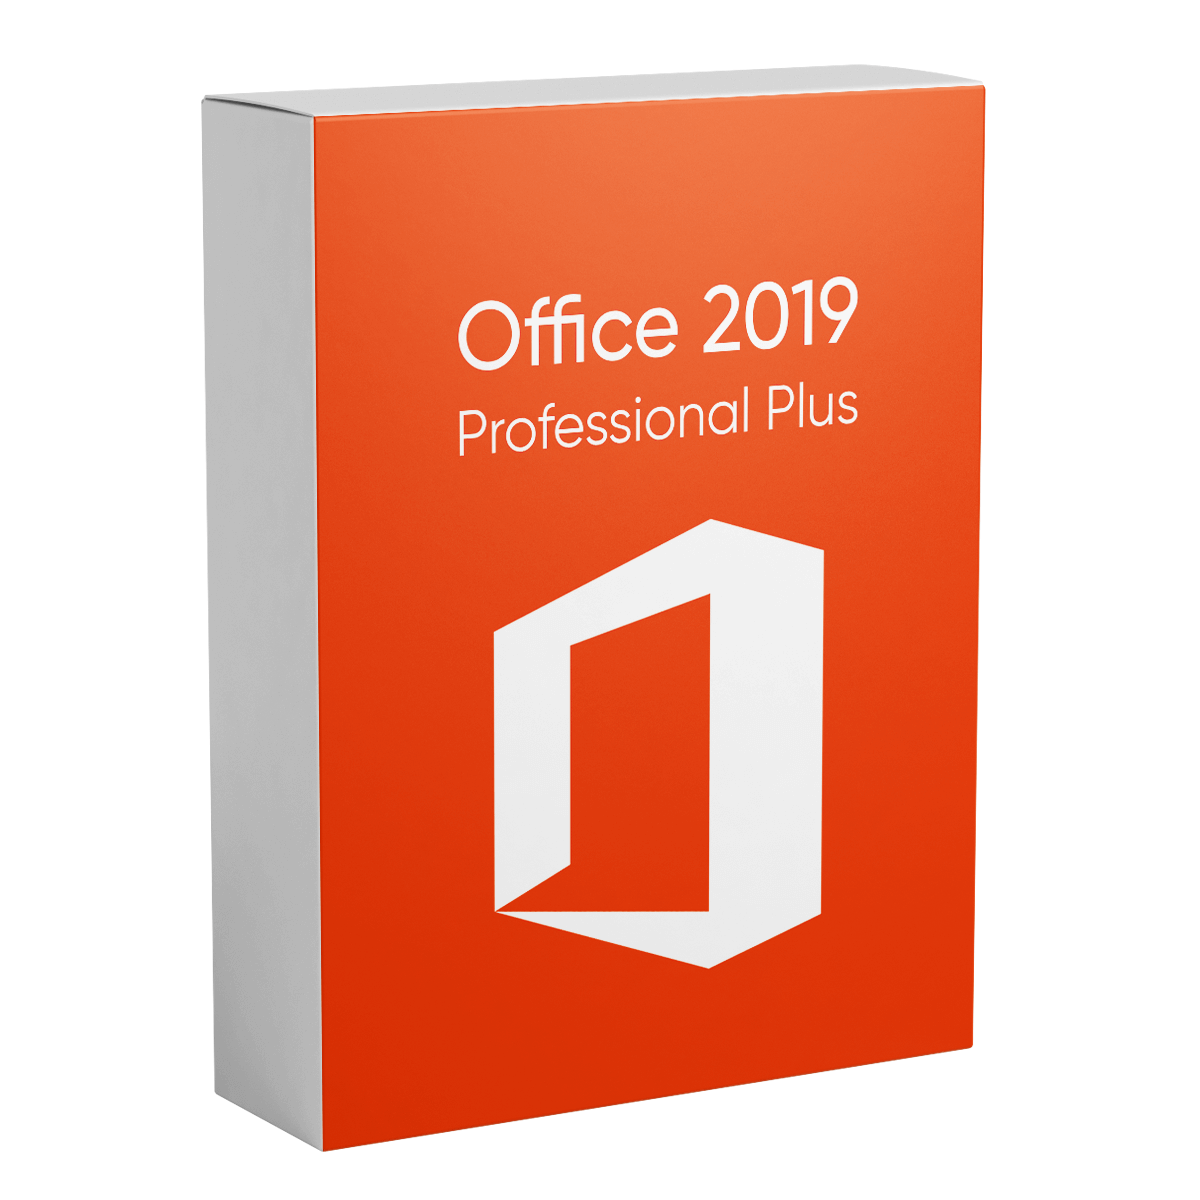 Office 2019 Professional Plus - Lifetime License For 1 PC